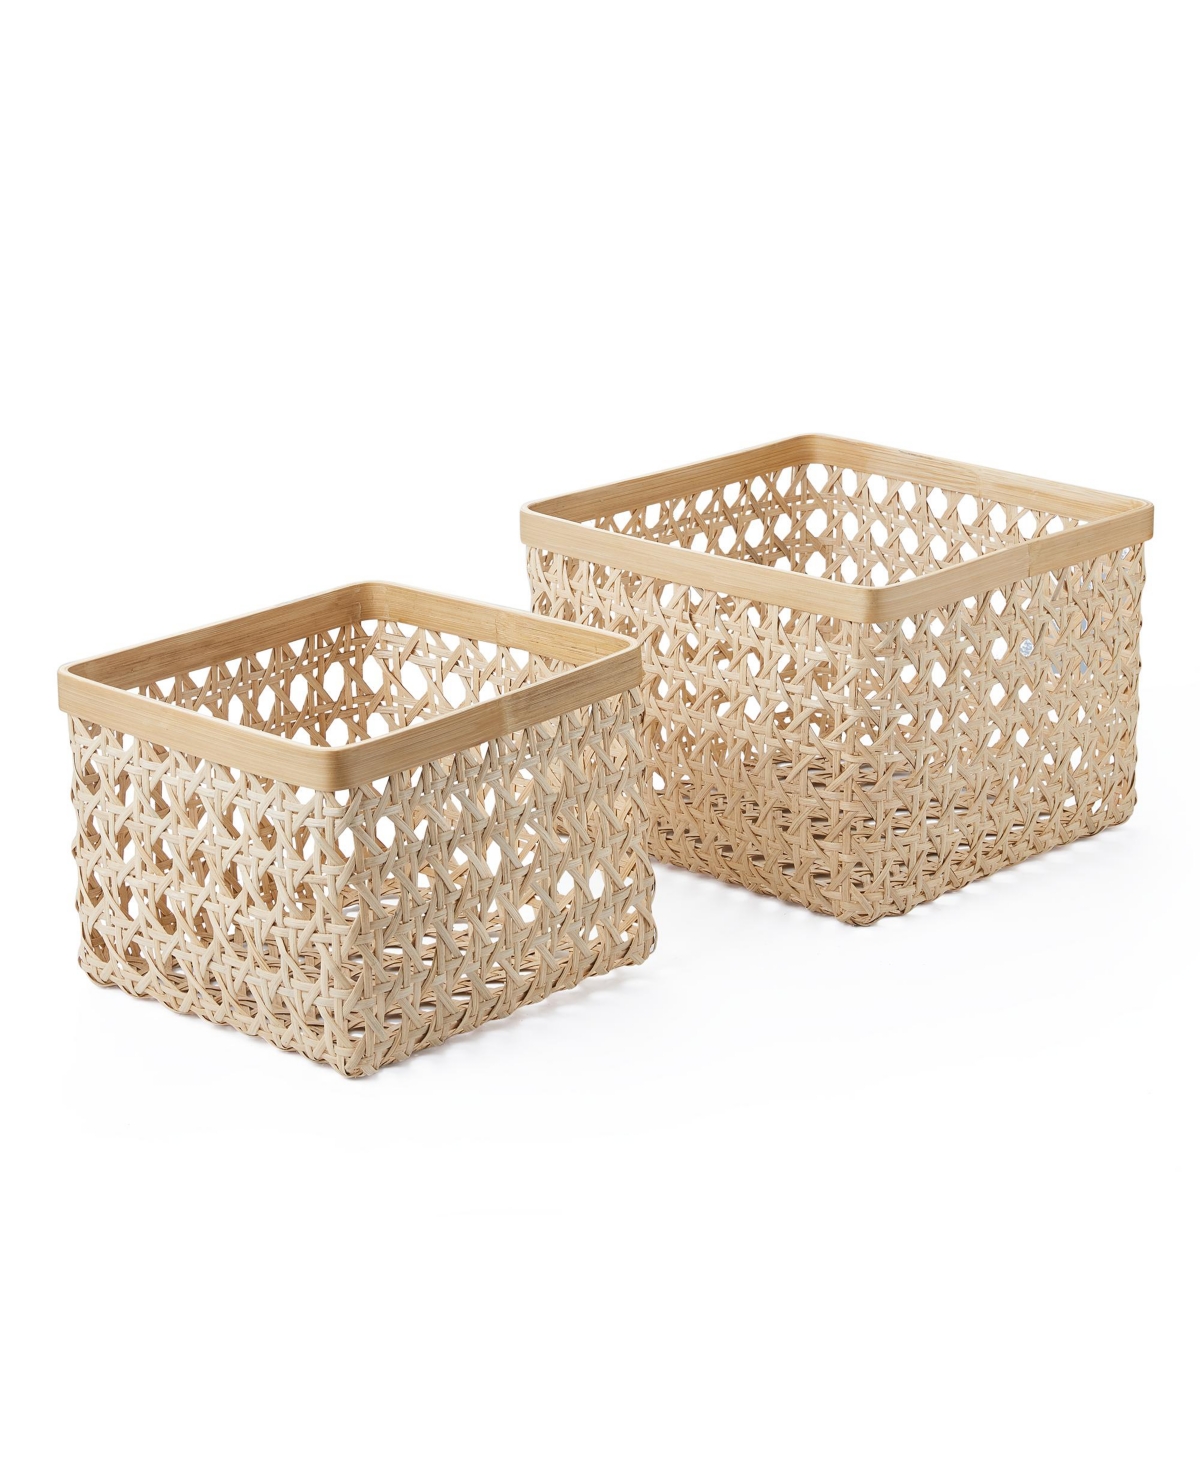 2 Piece Square Natural Cane with Bamboo Rim - Natural